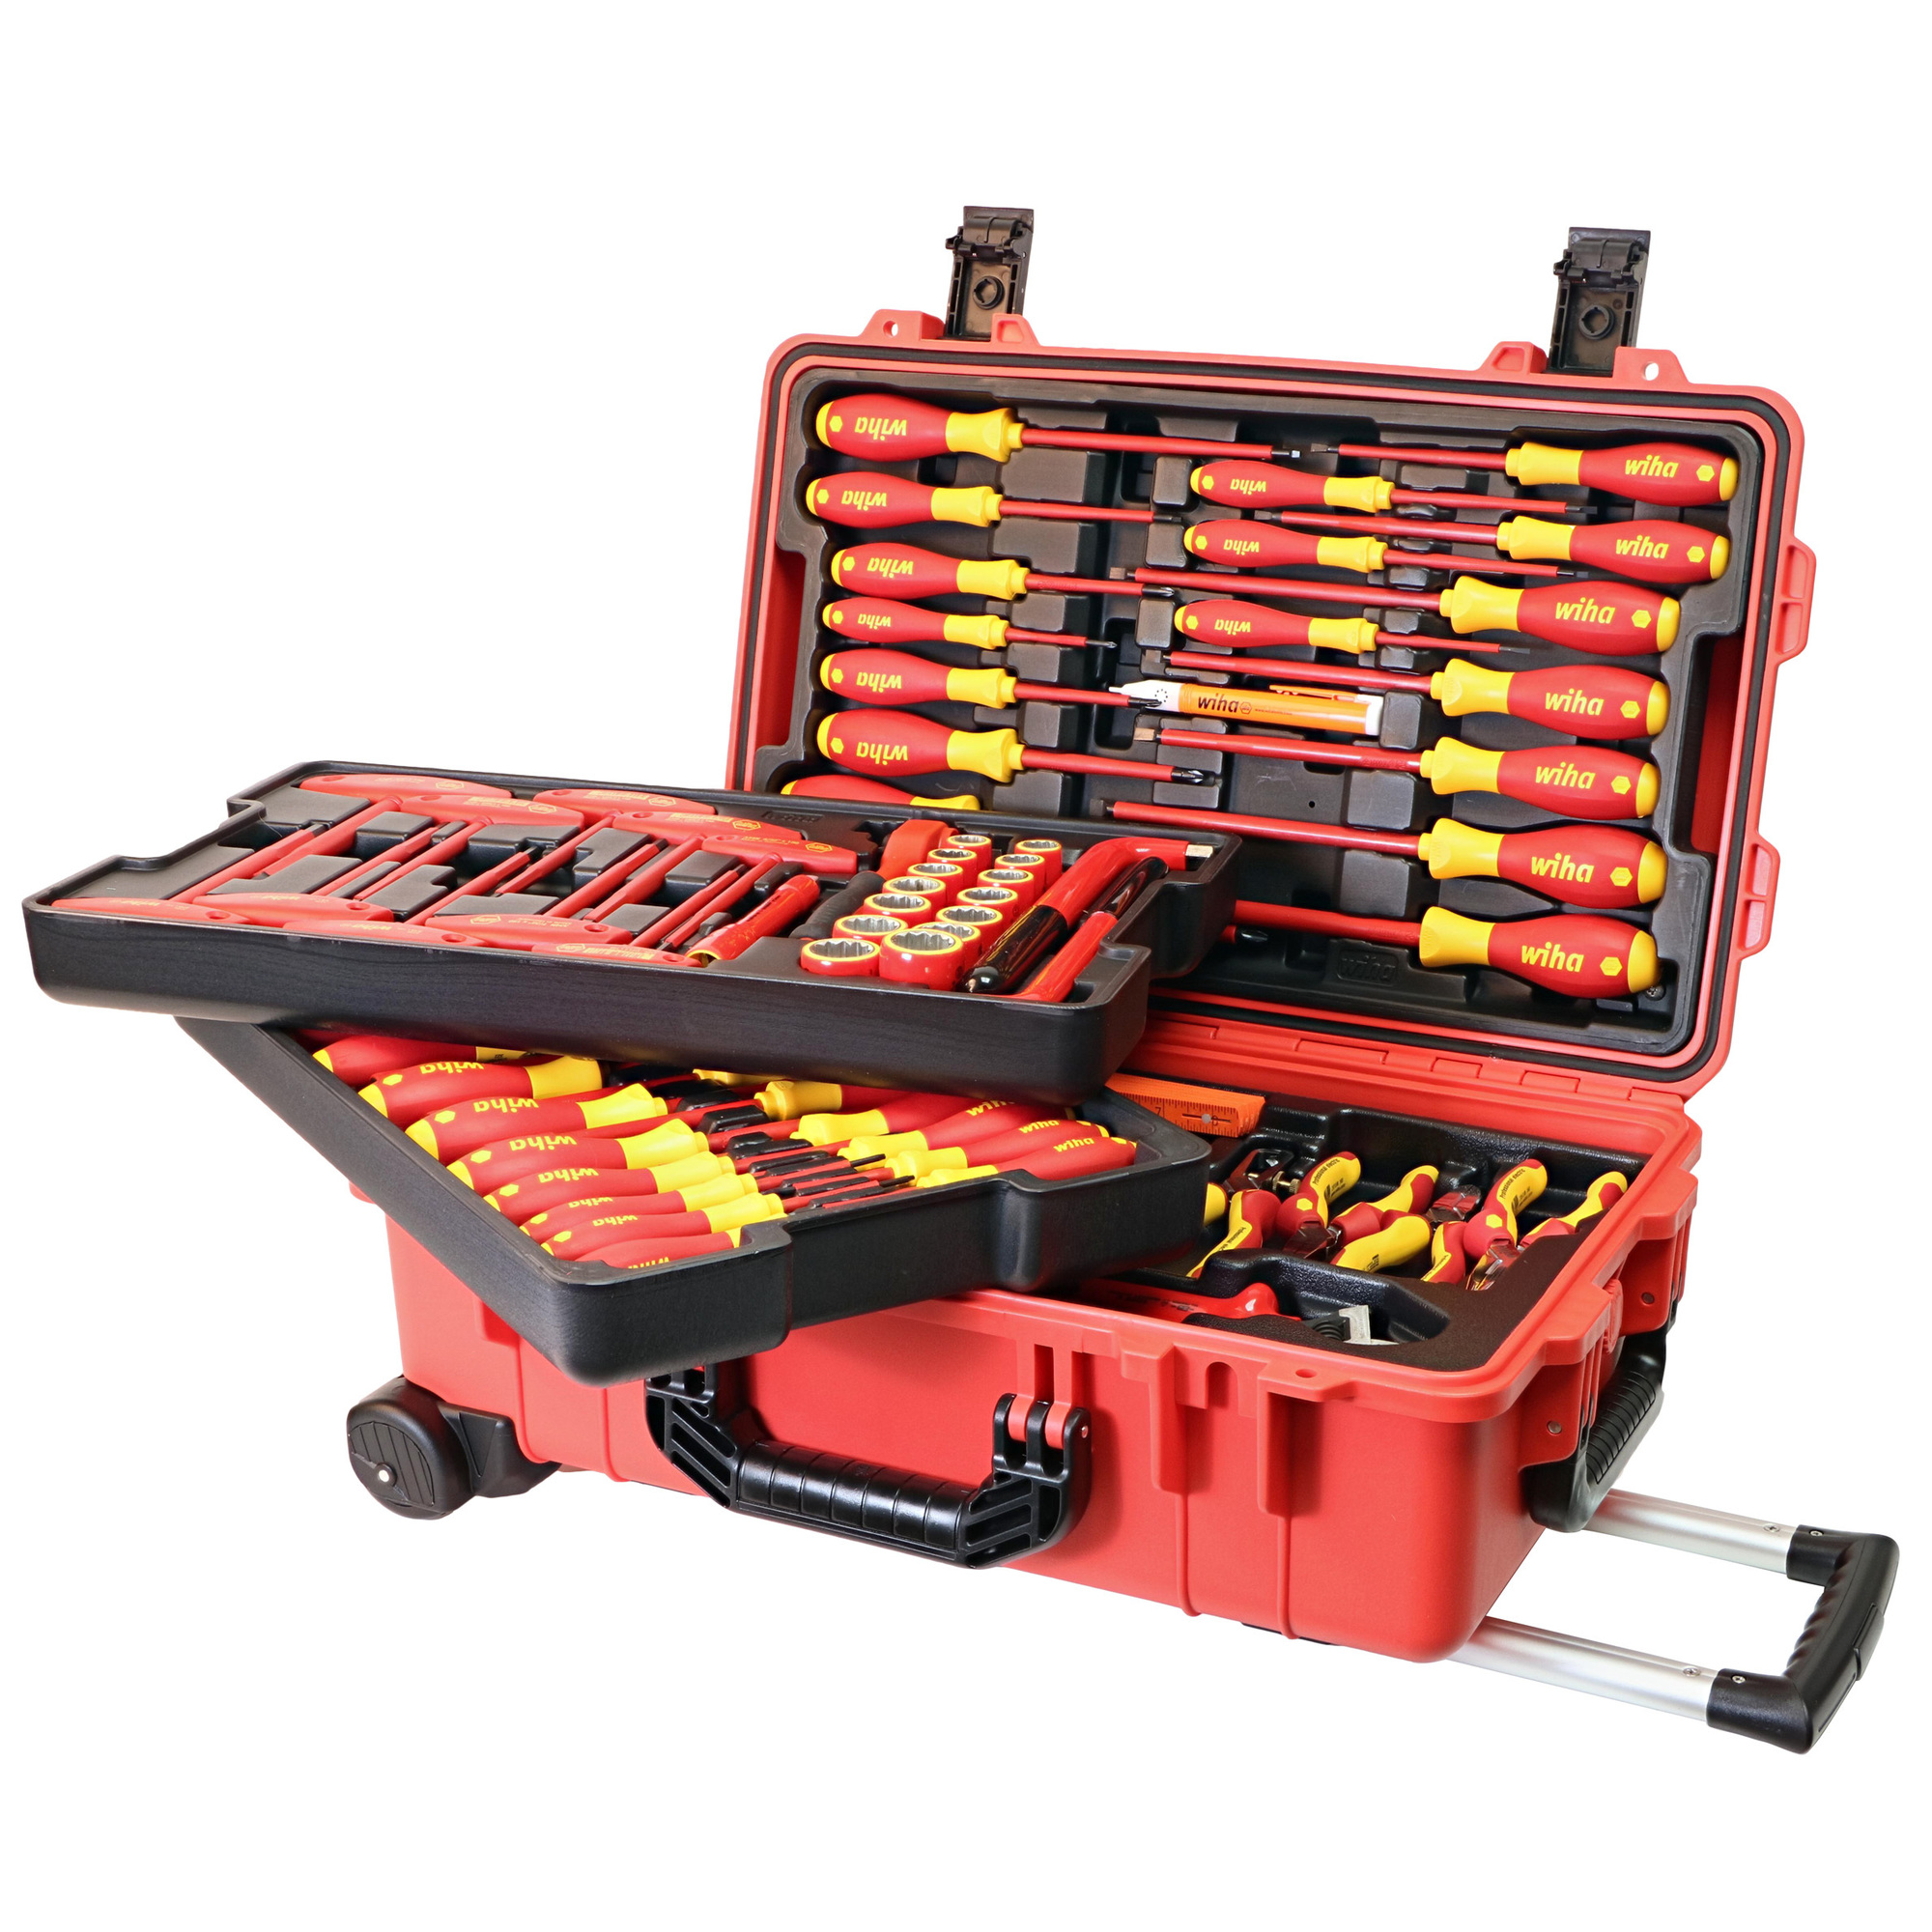 Wiha, 80 Piece Master Electrician's Tools Set with Case, Pieces (qty.) 81, Model 32800